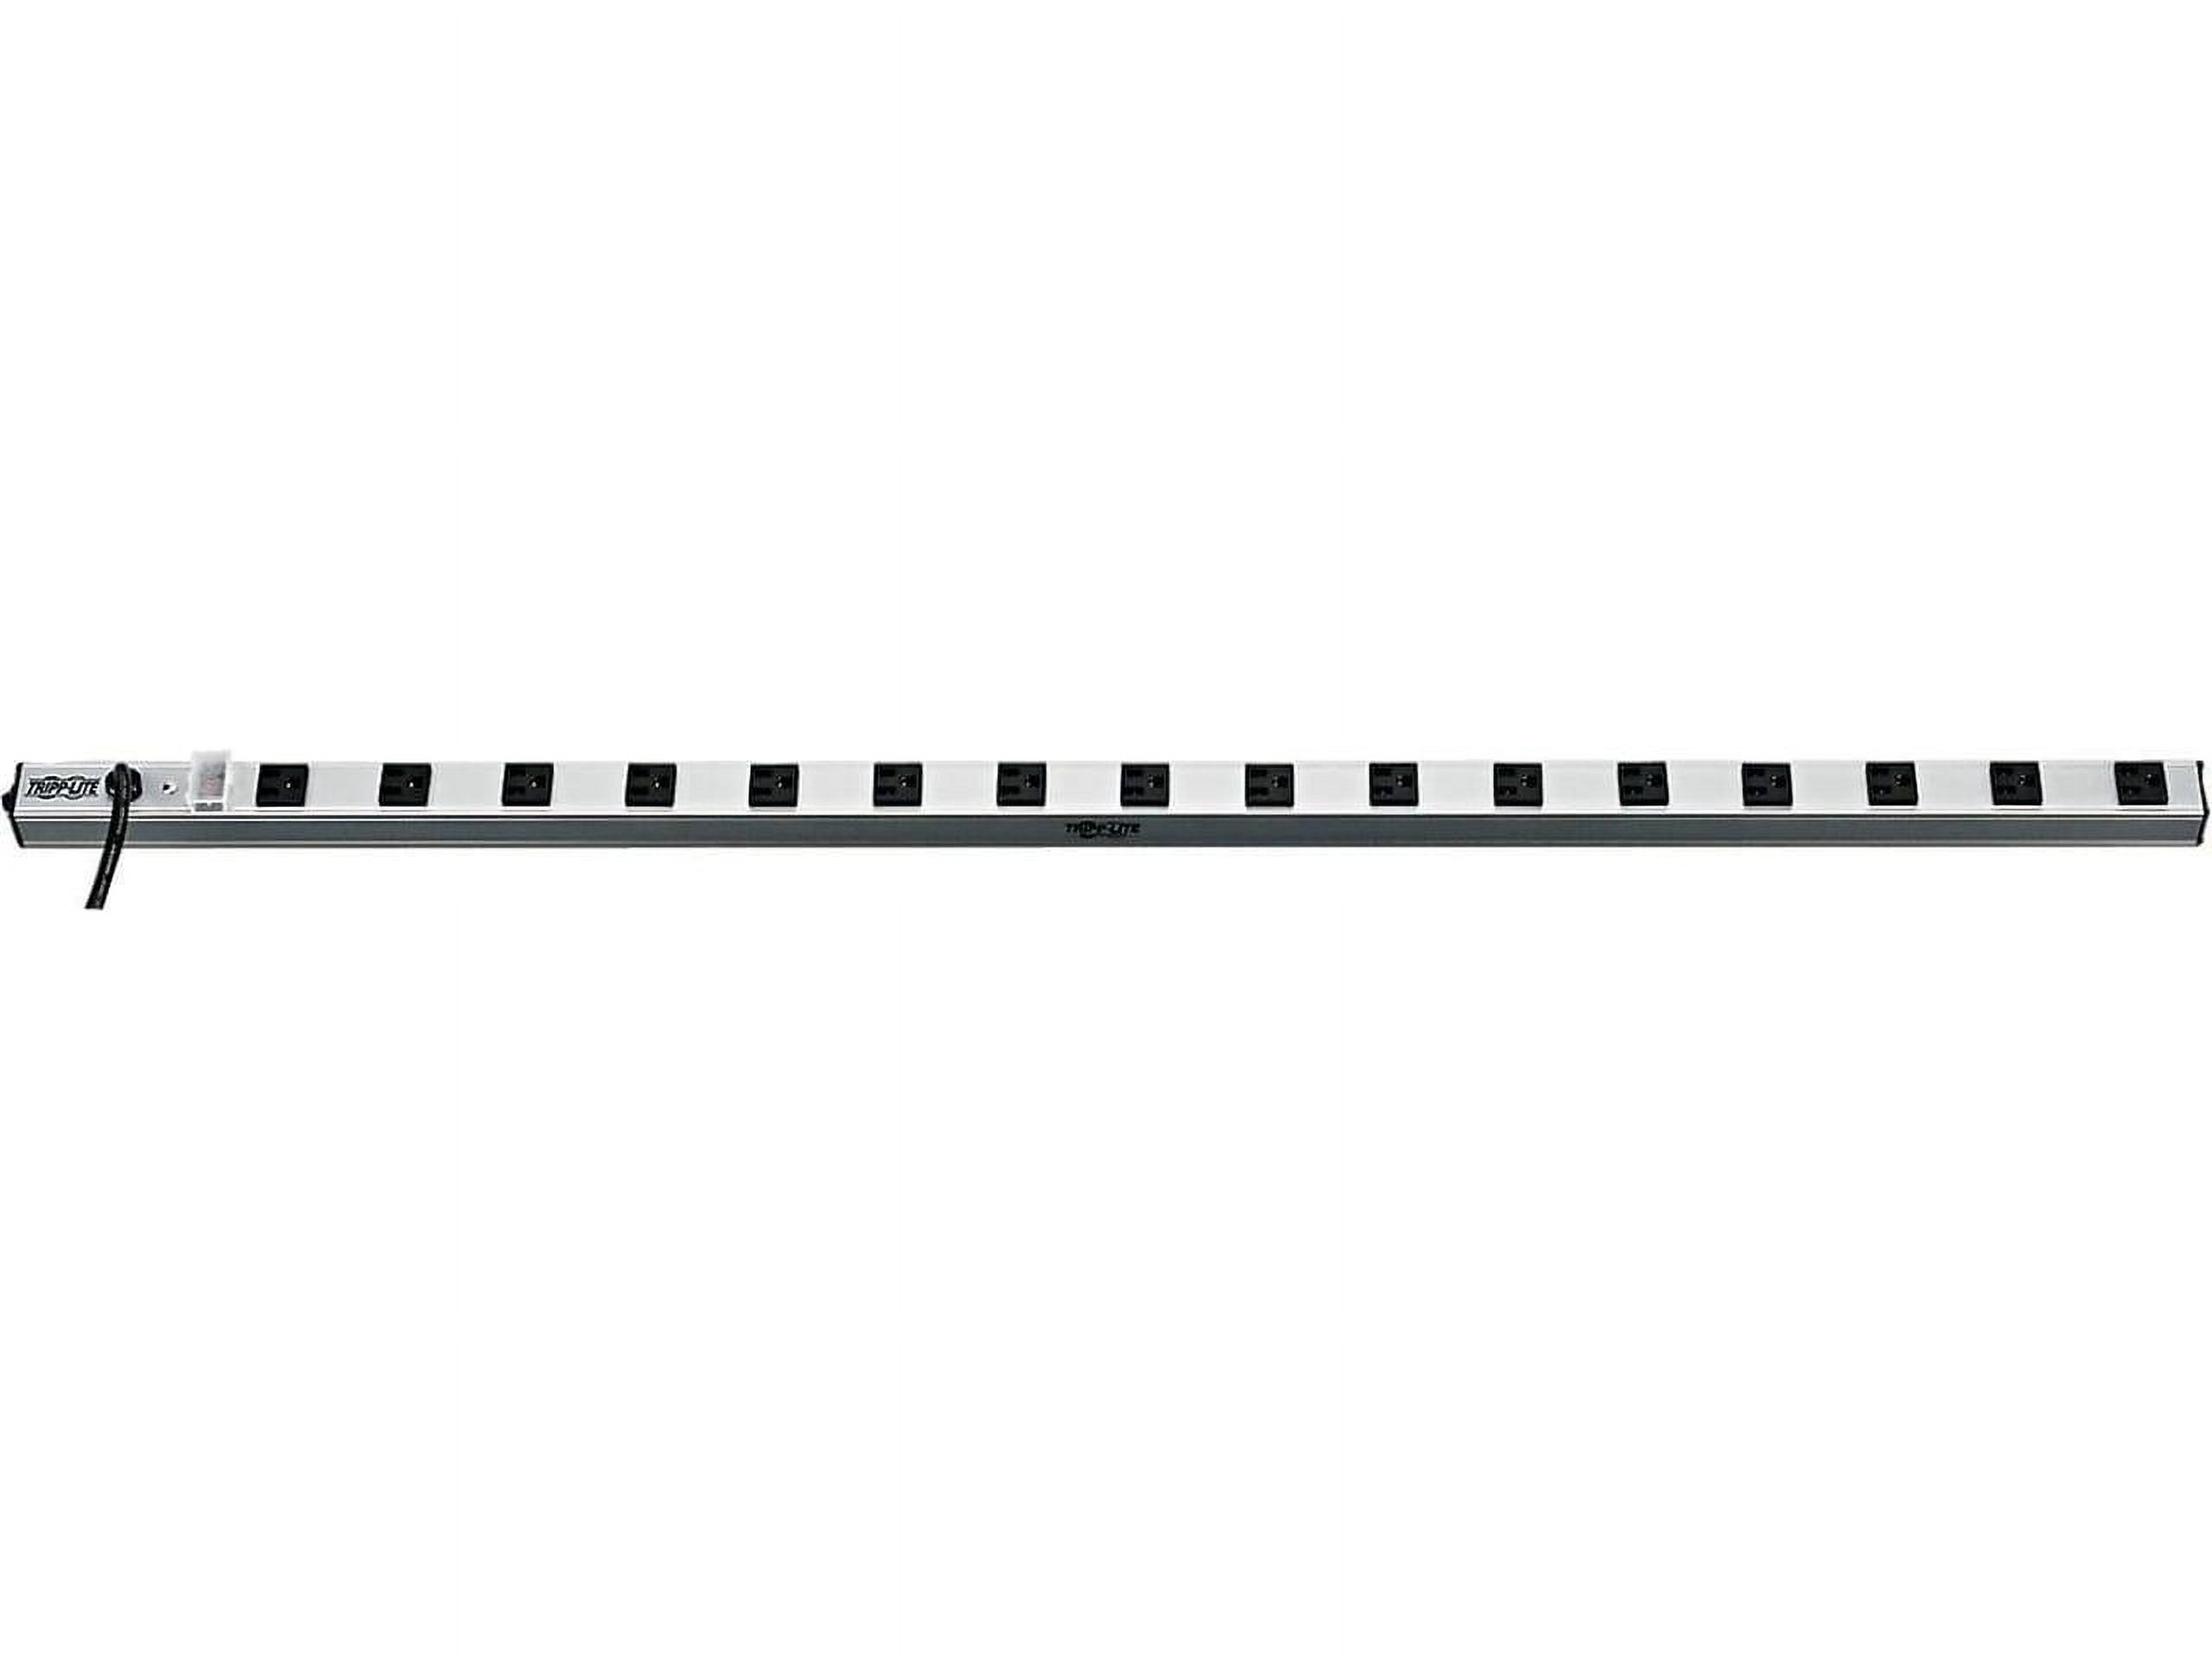 Tripp Lite 16 Outlet Power Strip, Long Cord 15 ft, 120V, 15A, 48 inch Vertical Housing, Metal (PS4816) - image 4 of 11